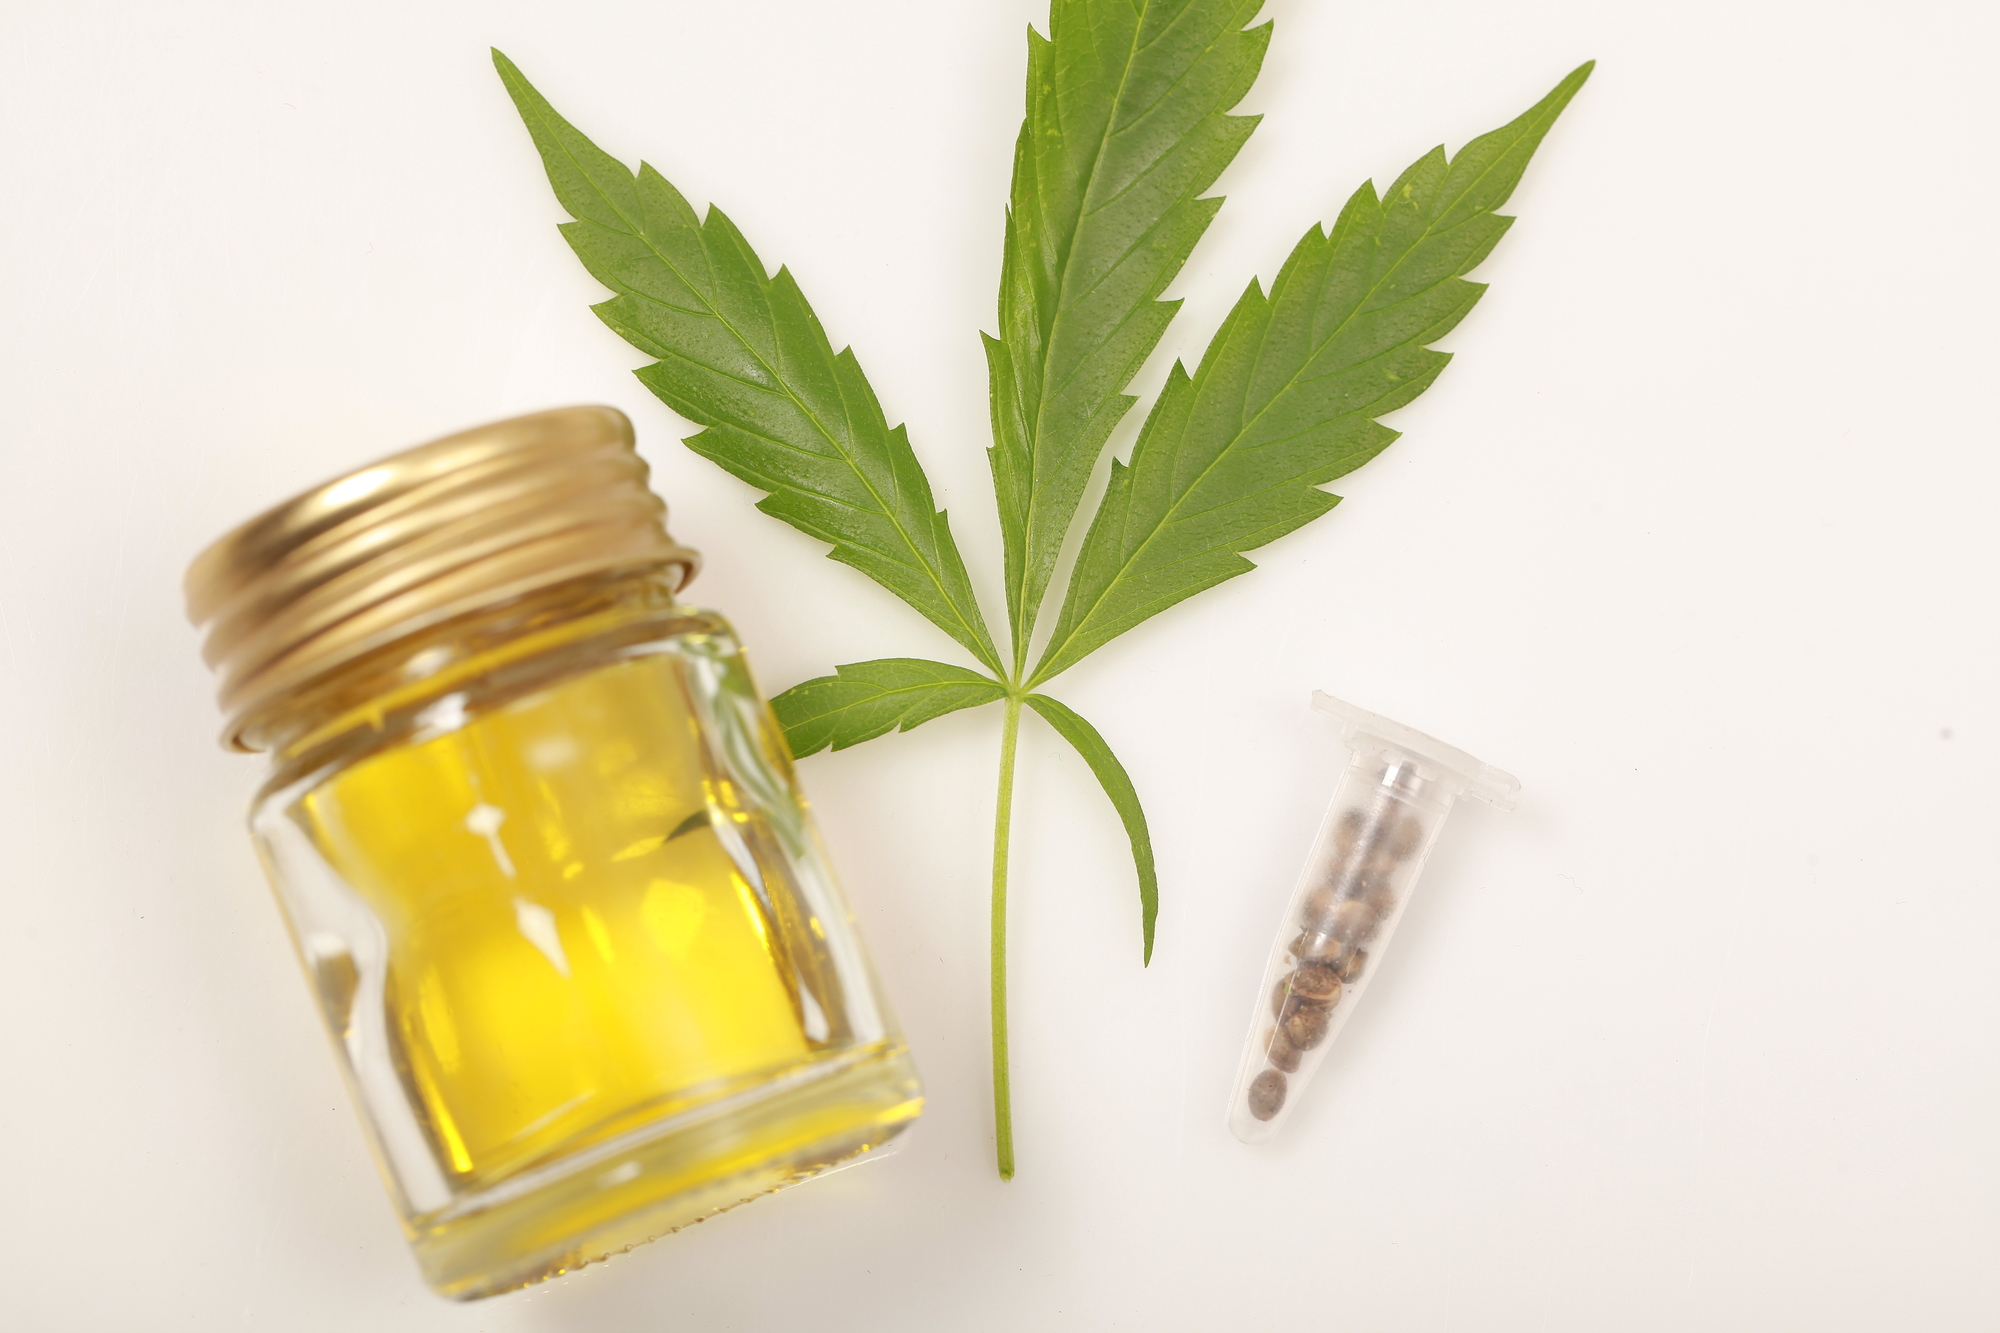 where are good organic cbd oil products?